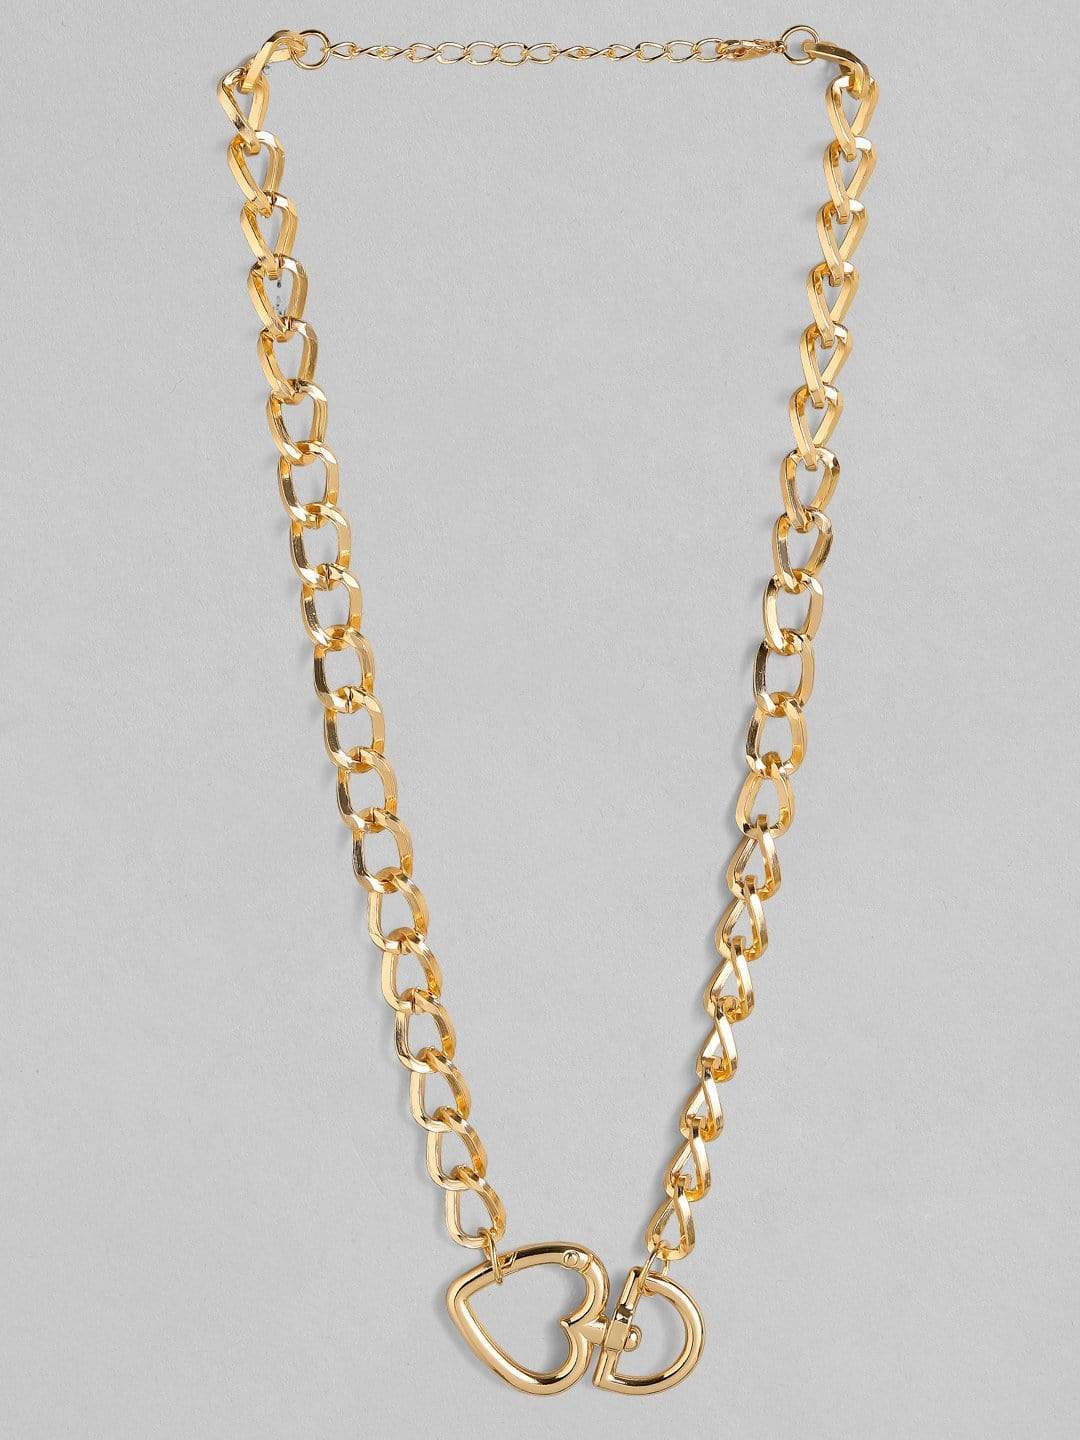 rubans gold plated handcrafted heart shape interlinked chain necklace chain necklaces 23417252872366